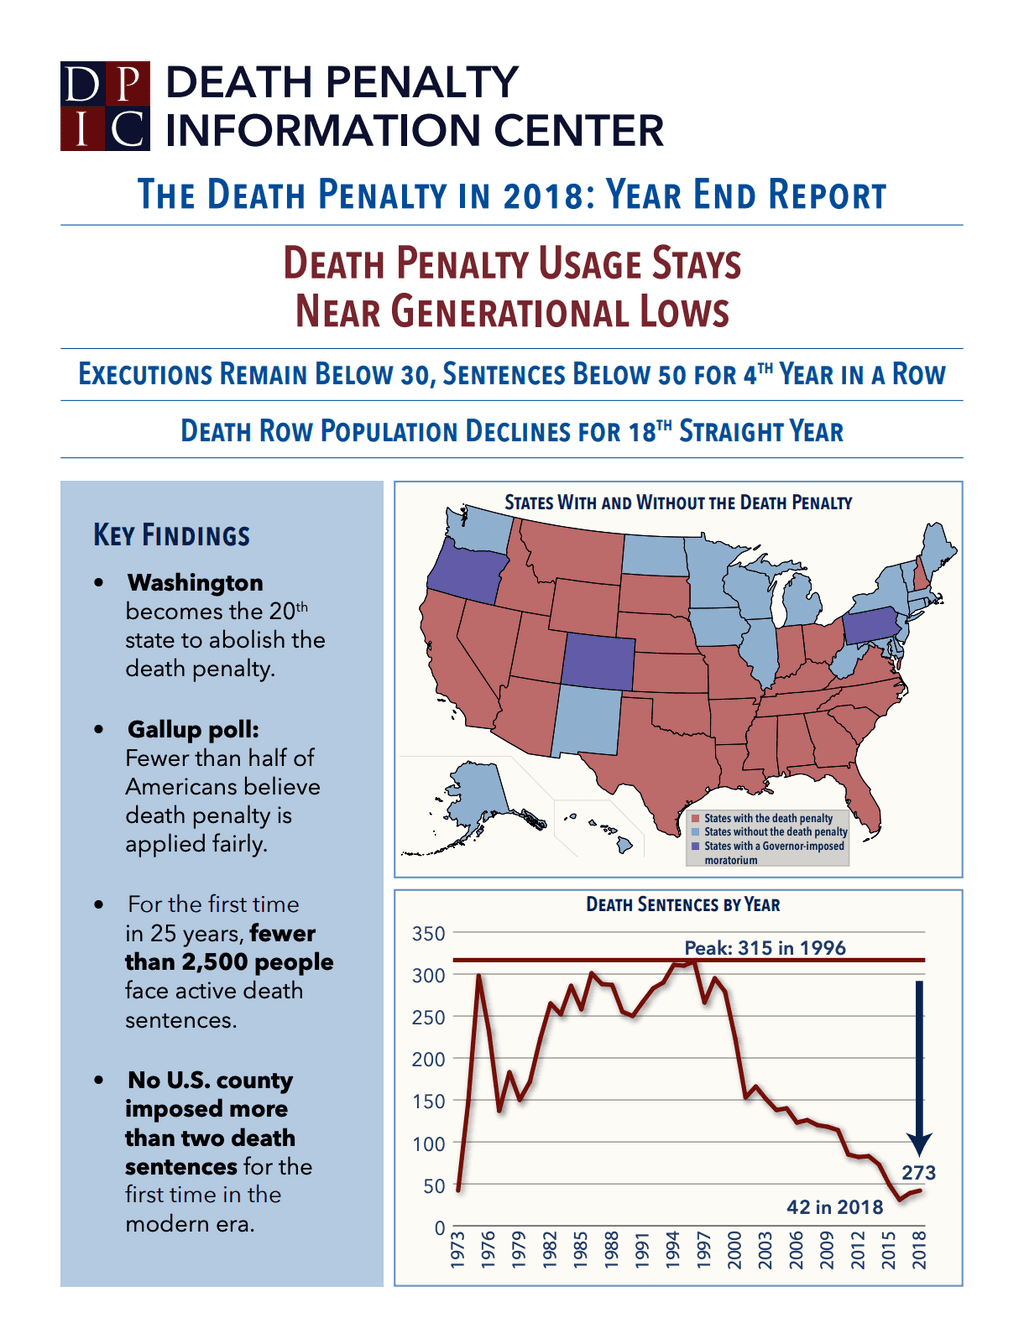 The Death Penalty in 2018: Year End Report